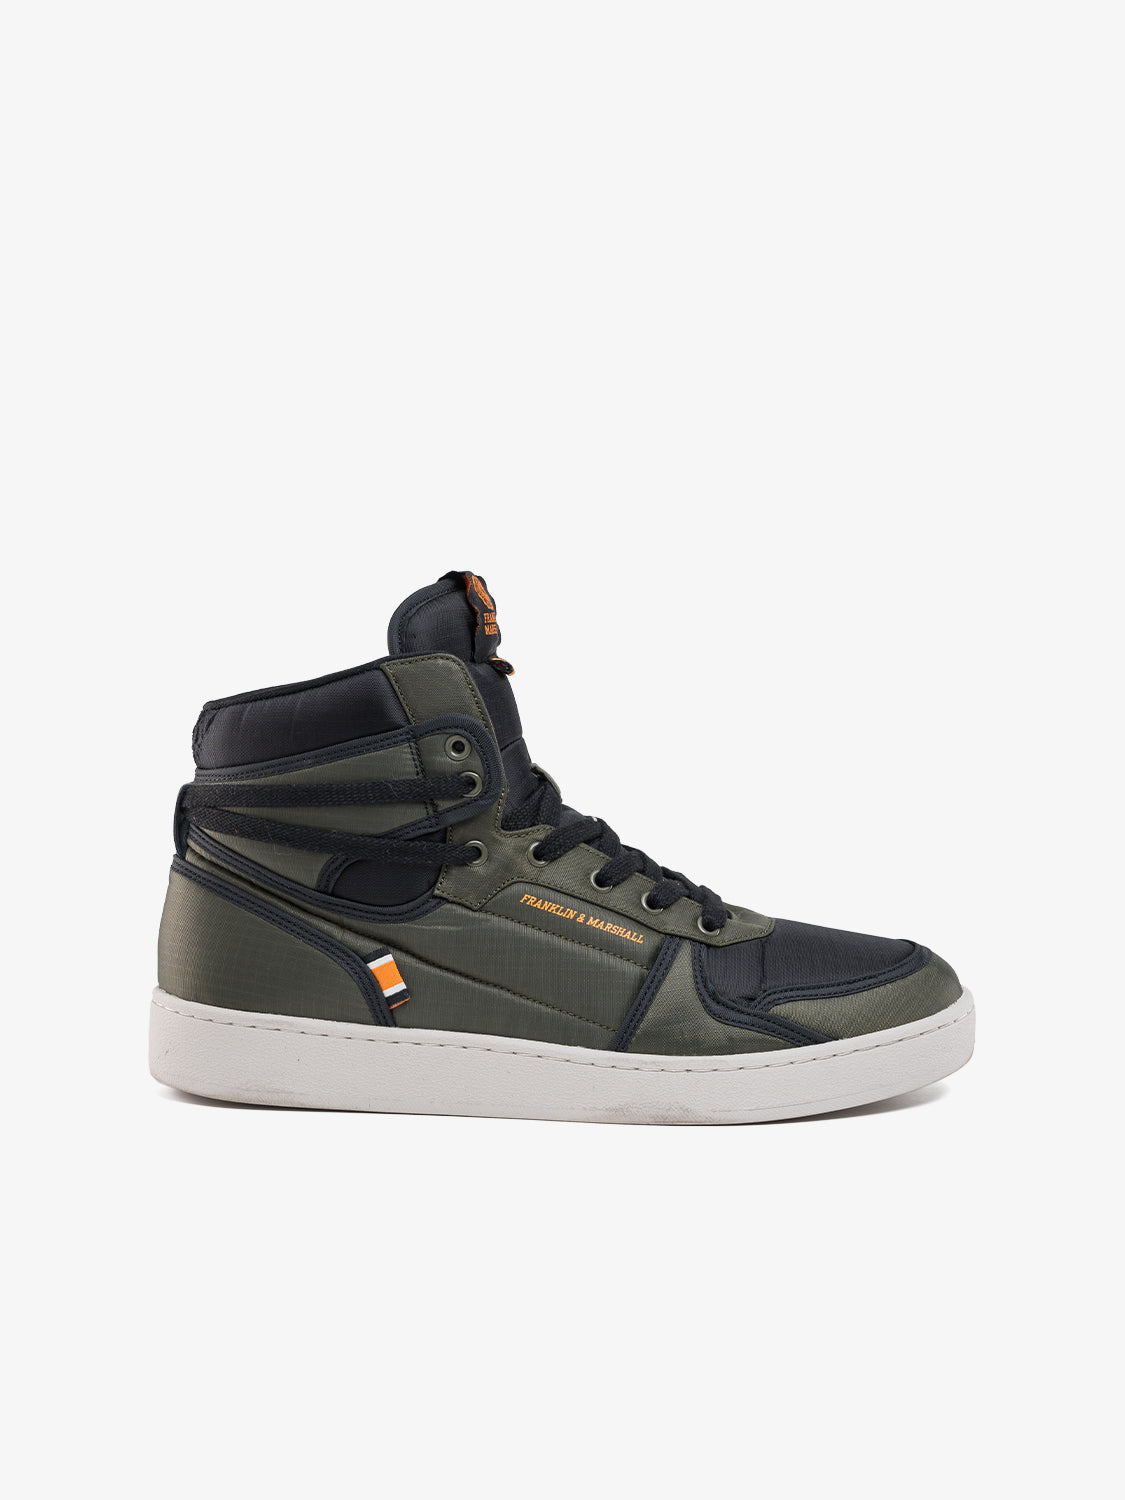 THETA PRO-ARMY men's mid-cut leather lace-up sneakers | Franklin & Marshall